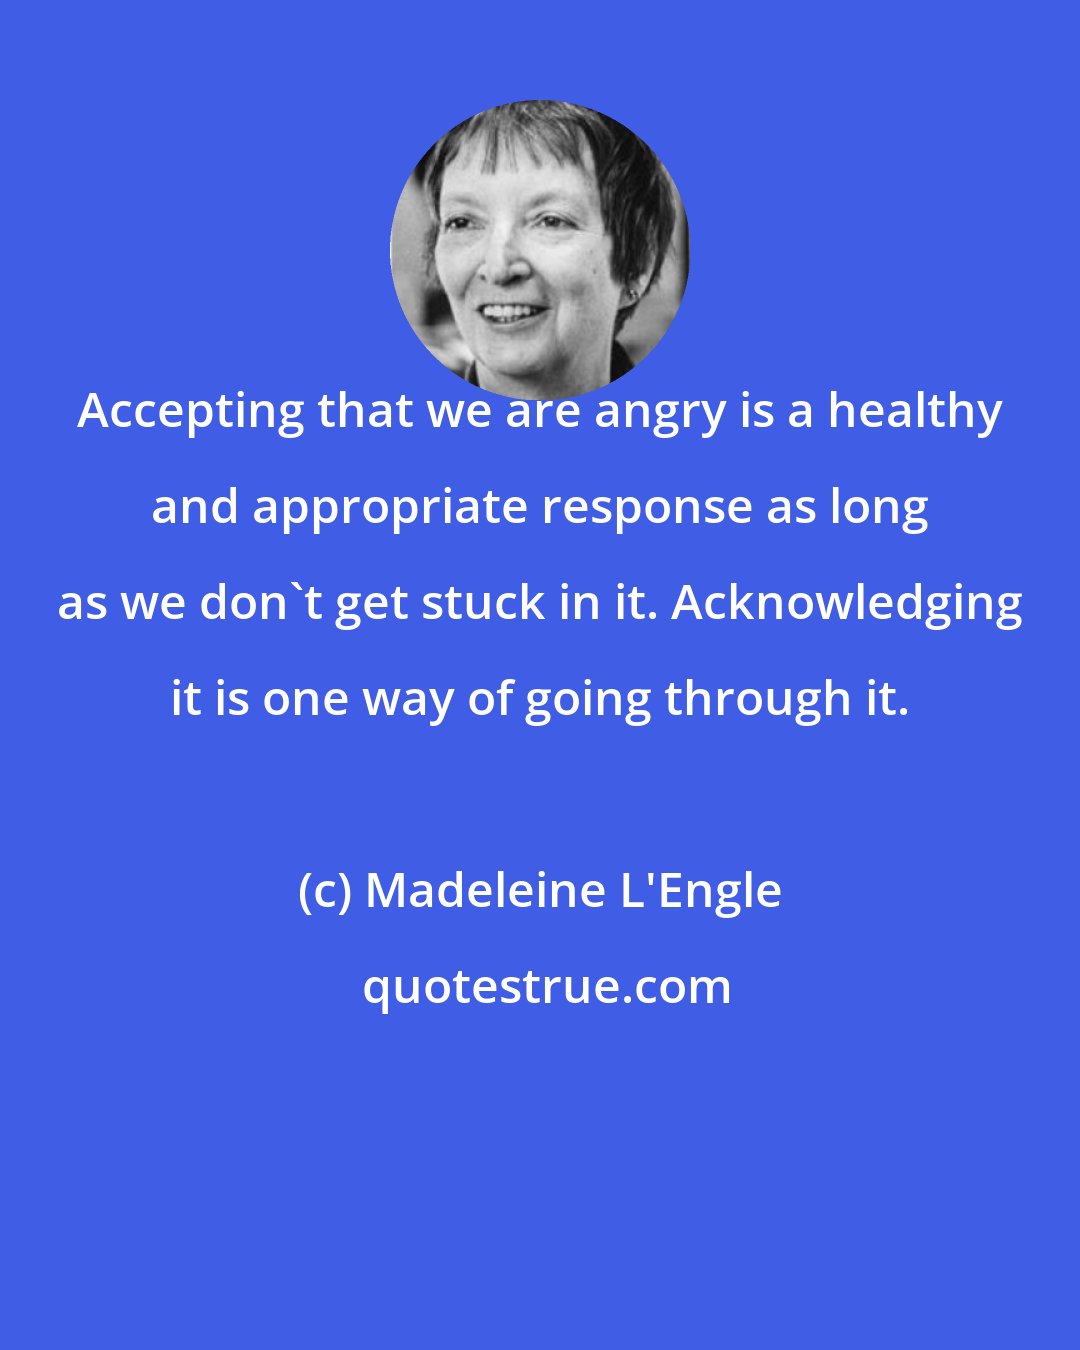 Madeleine L'Engle: Accepting that we are angry is a healthy and appropriate response as long as we don't get stuck in it. Acknowledging it is one way of going through it.